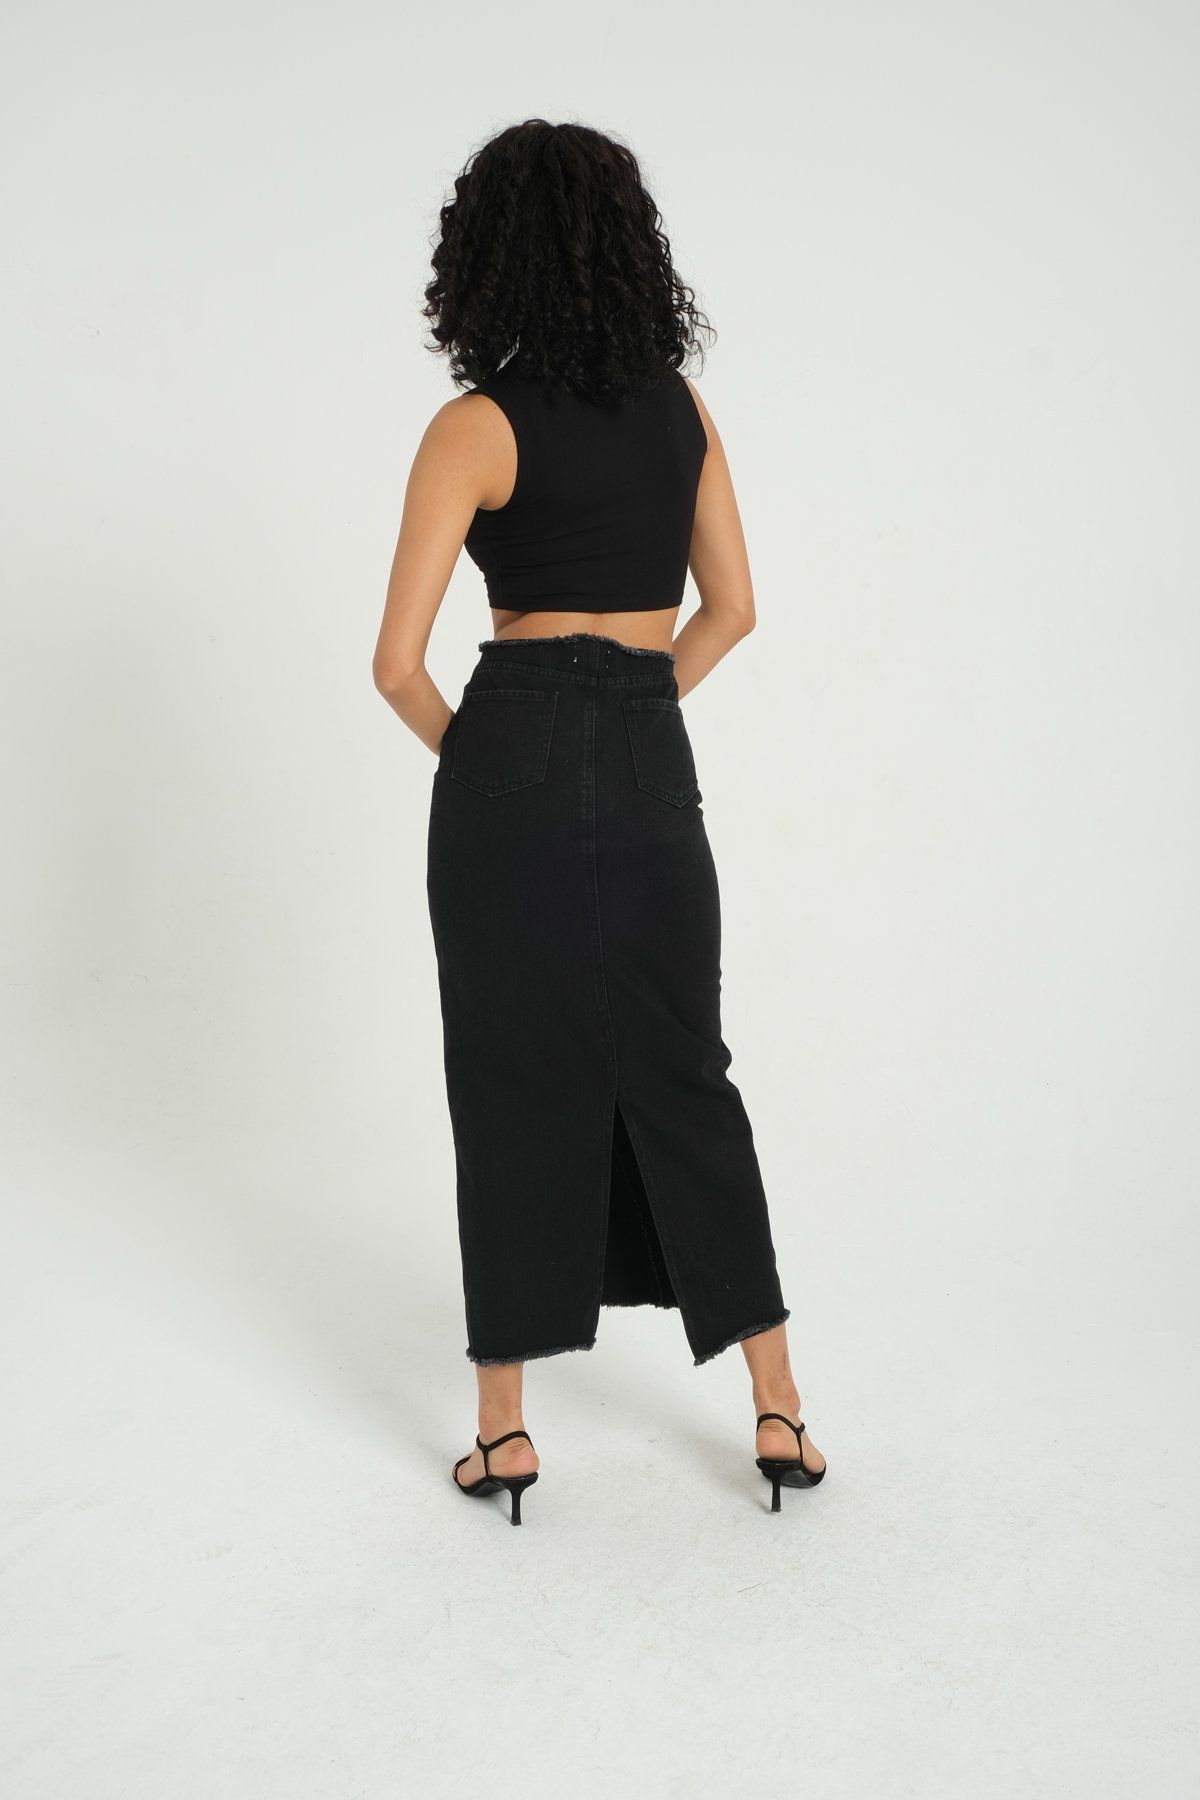 Mid Rise Maxi Skirt with a Seamless Hem and Belt